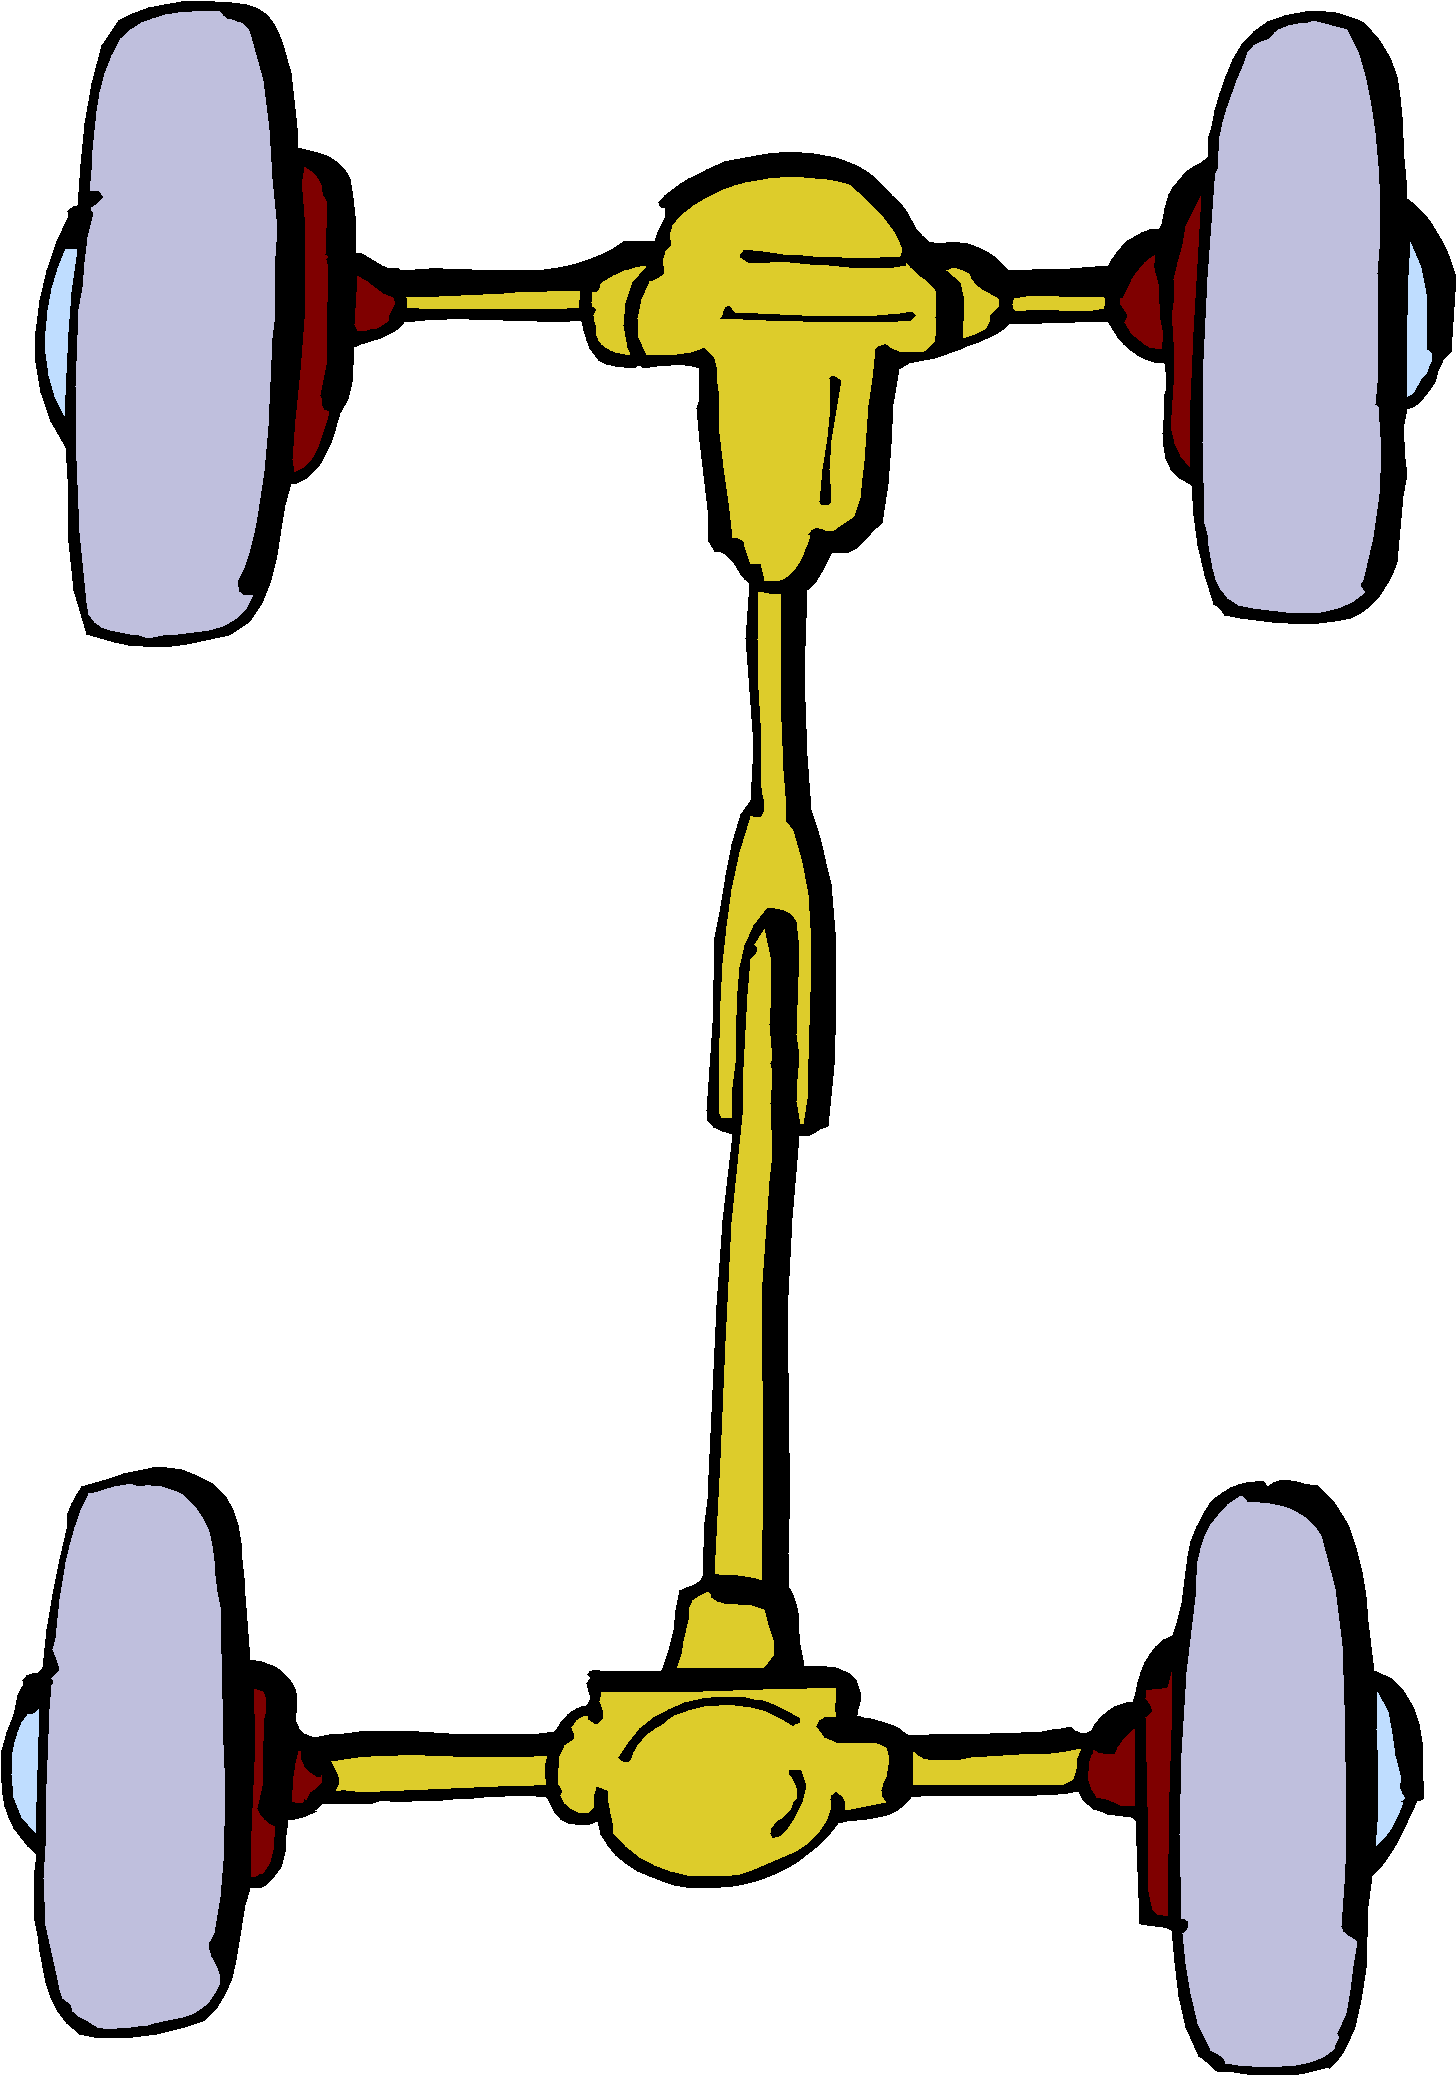 Wheel And Axle Simple Machines Gif (1520x2166)